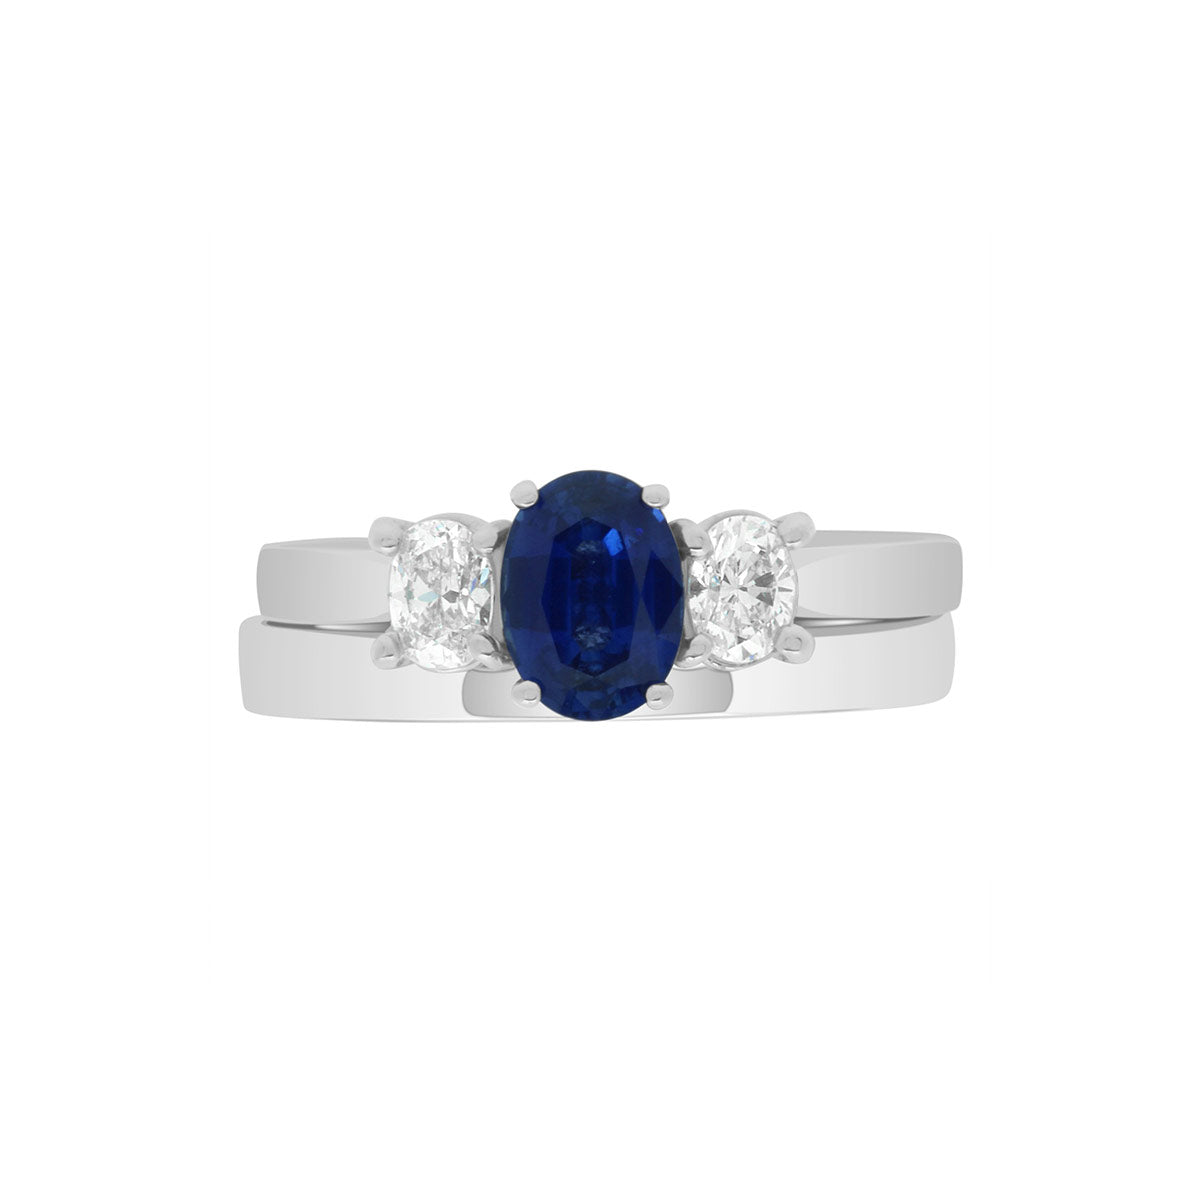 Sapphire &amp; Diamond Trilogy Ring in platinum950 with a matchng plain wedding ring